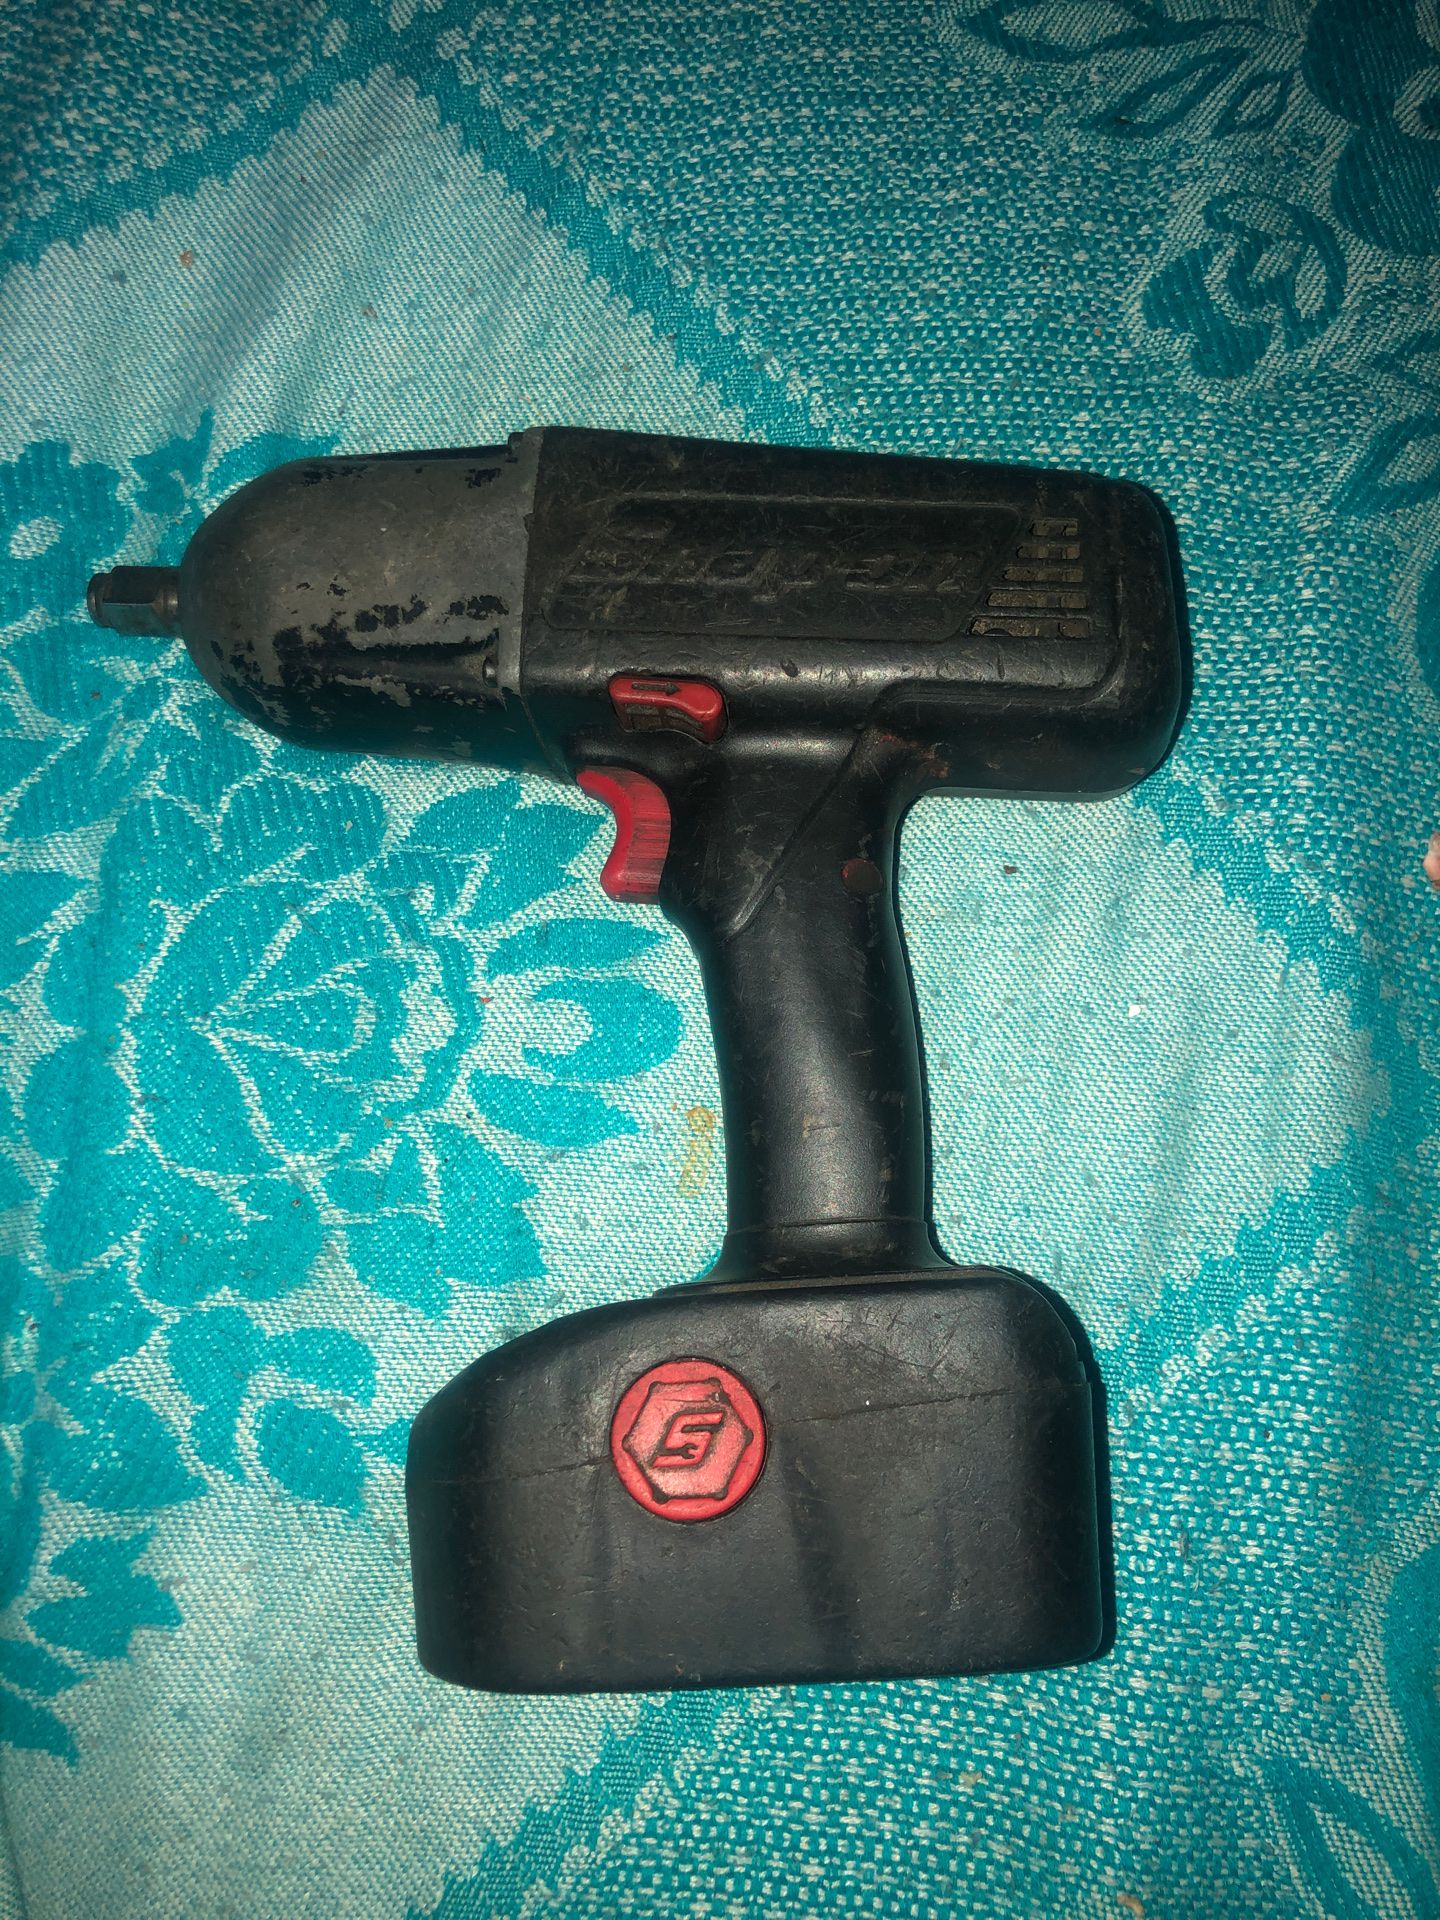 Snap on impact drill